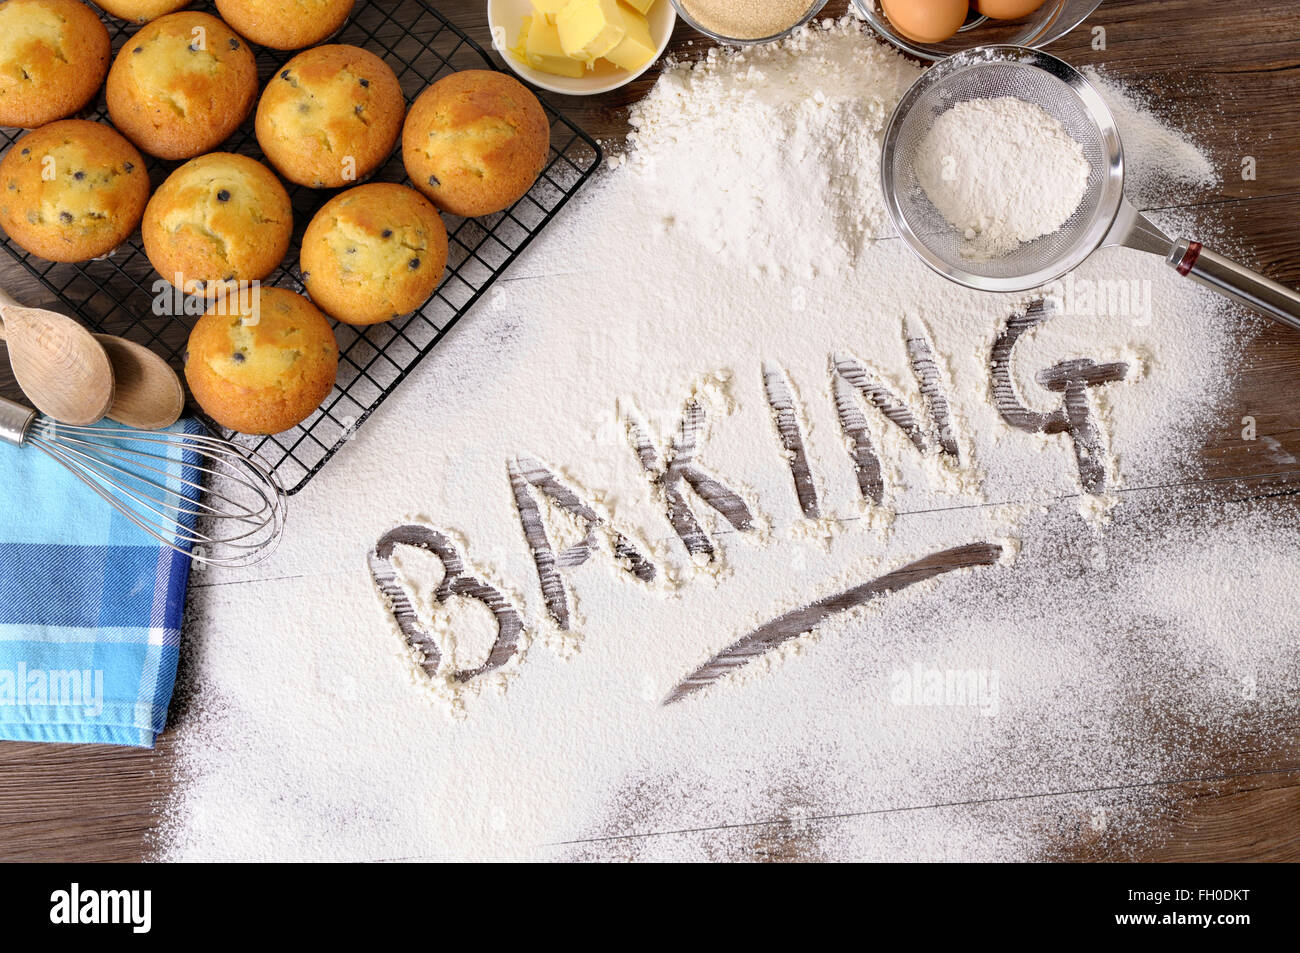 The word Baking written in flour on a dark wood table with freshly baked muffins and ingredients. Stock Photo